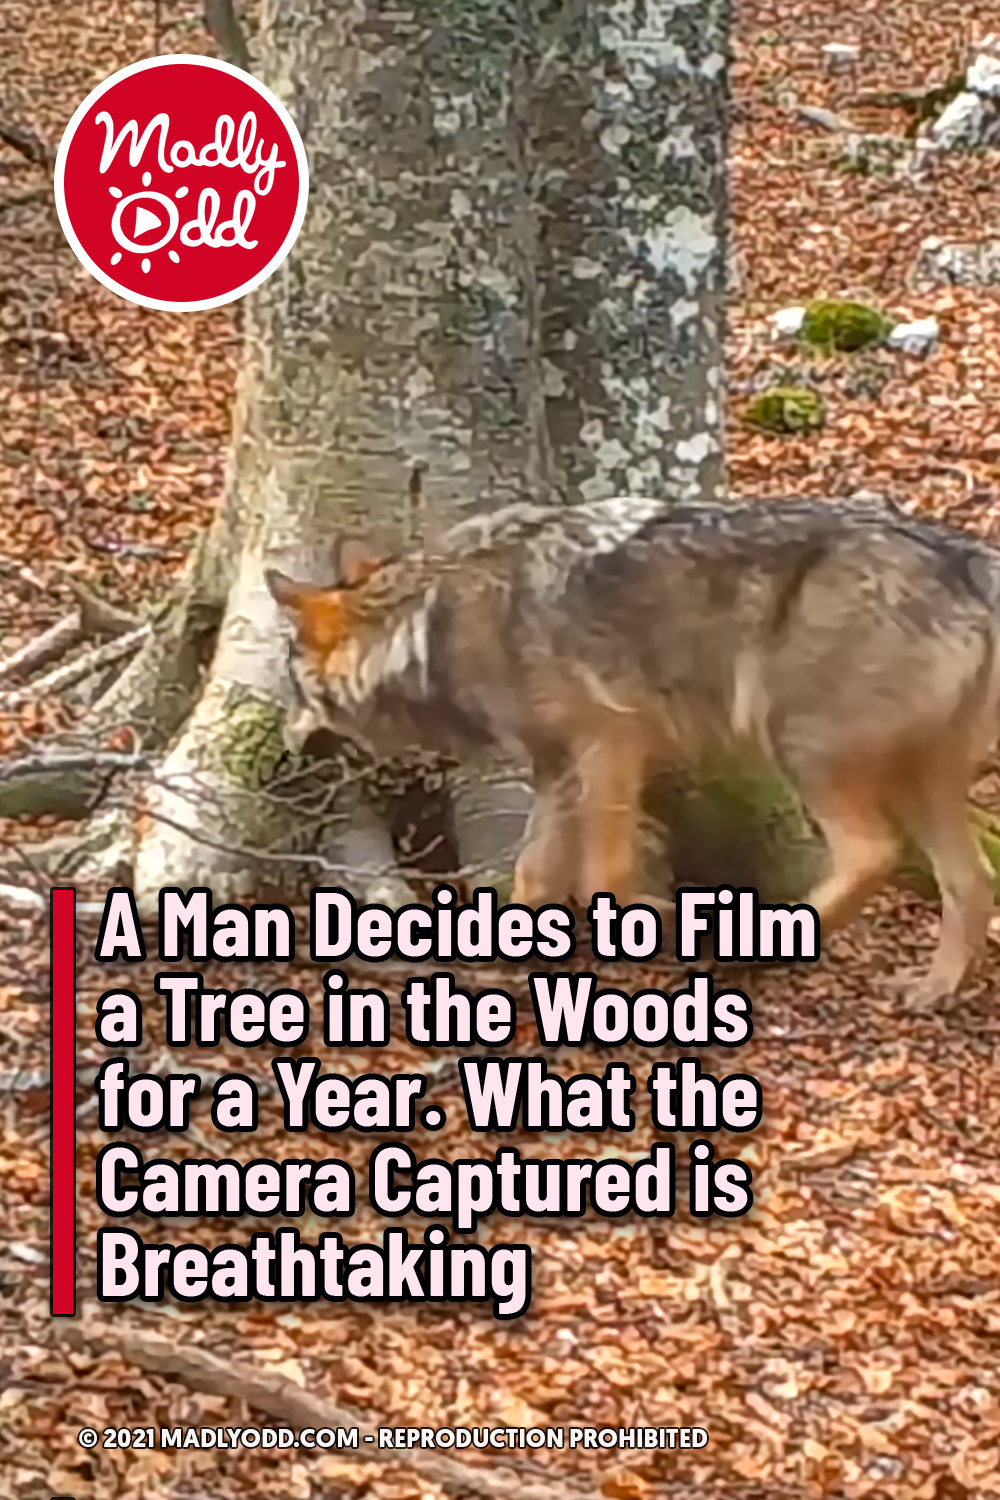 A Man Decides to Film a Tree in the Woods for a Year. What the Camera Captured is Breathtaking